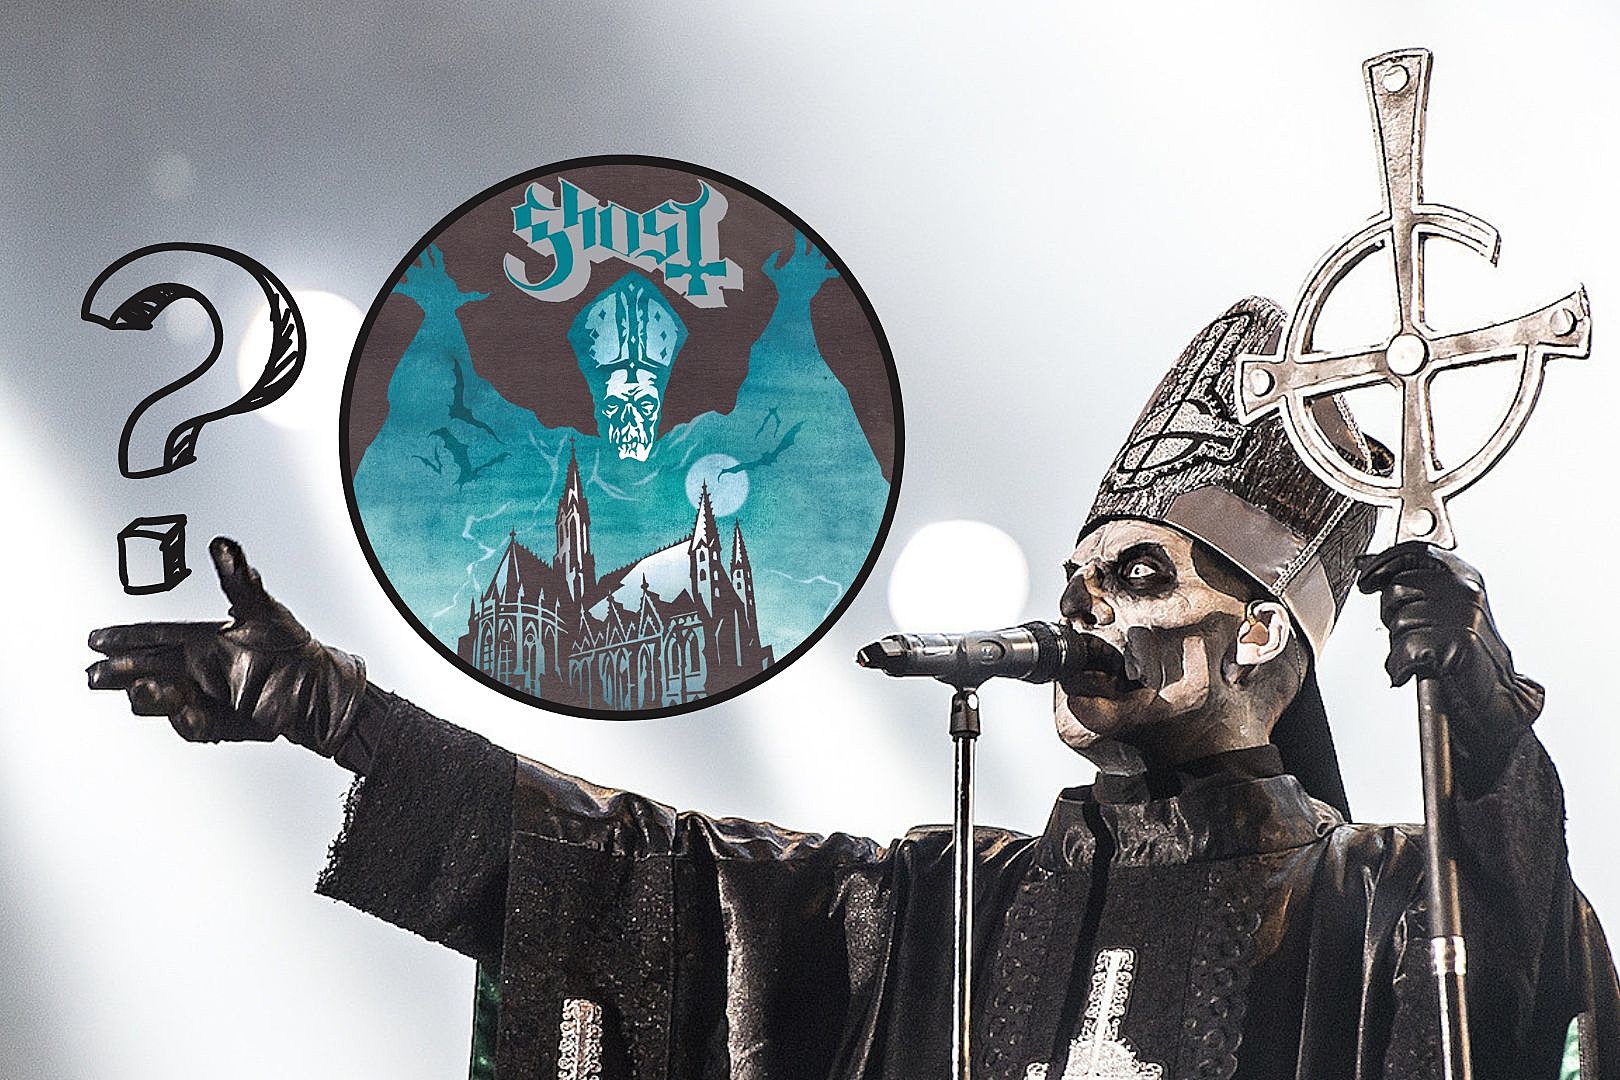 Ghost Wouldn't Exist If Not for One Song That Was 'Almost a Joke